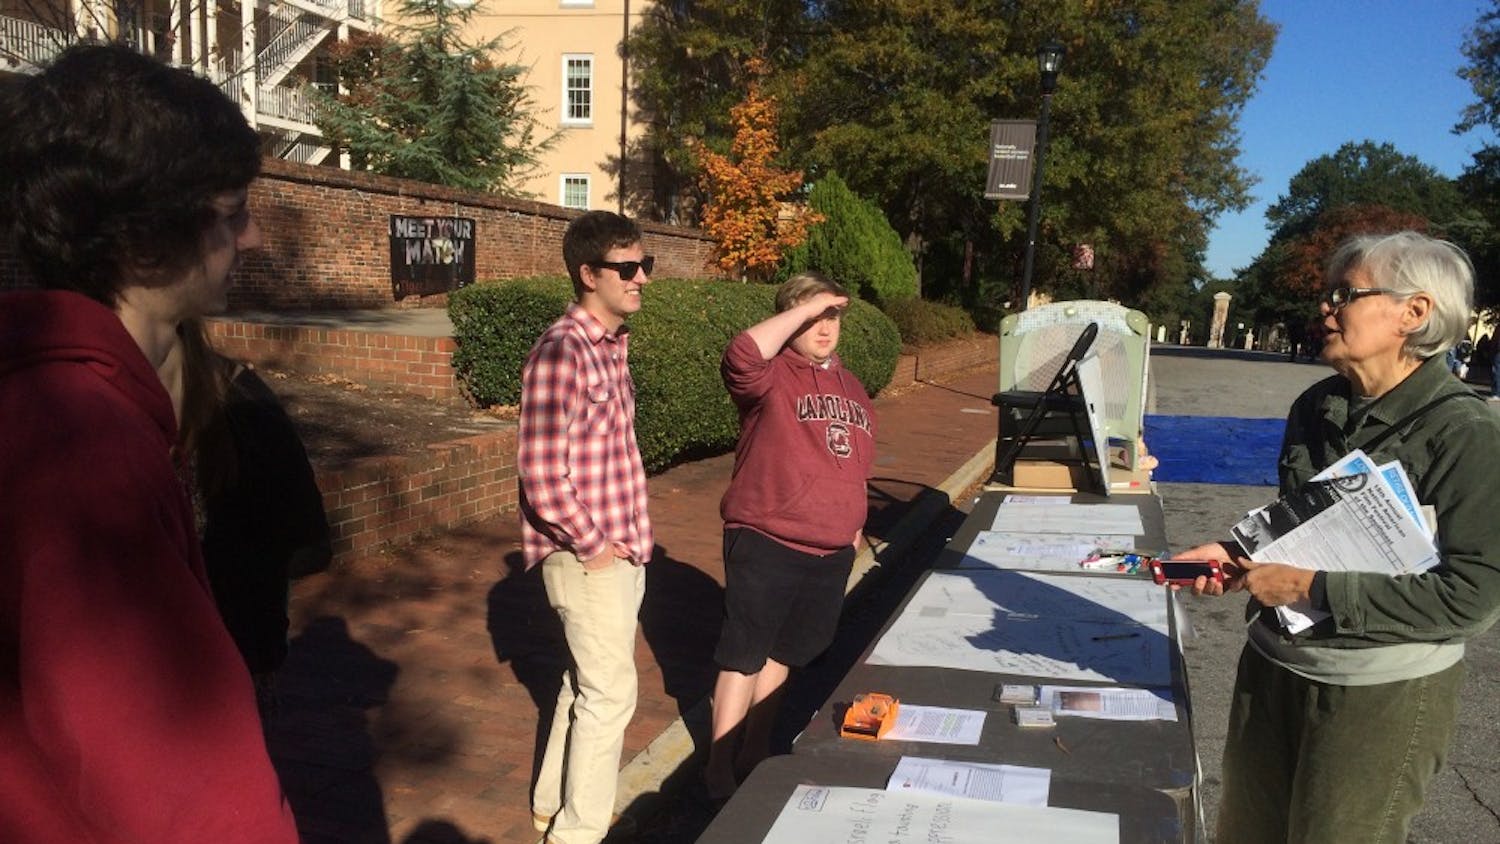 Ross Abbott, the president of the College Libertarians, said that the event was meant to provoke dialogue. Abbott, second from left, speaks with a passerby. 